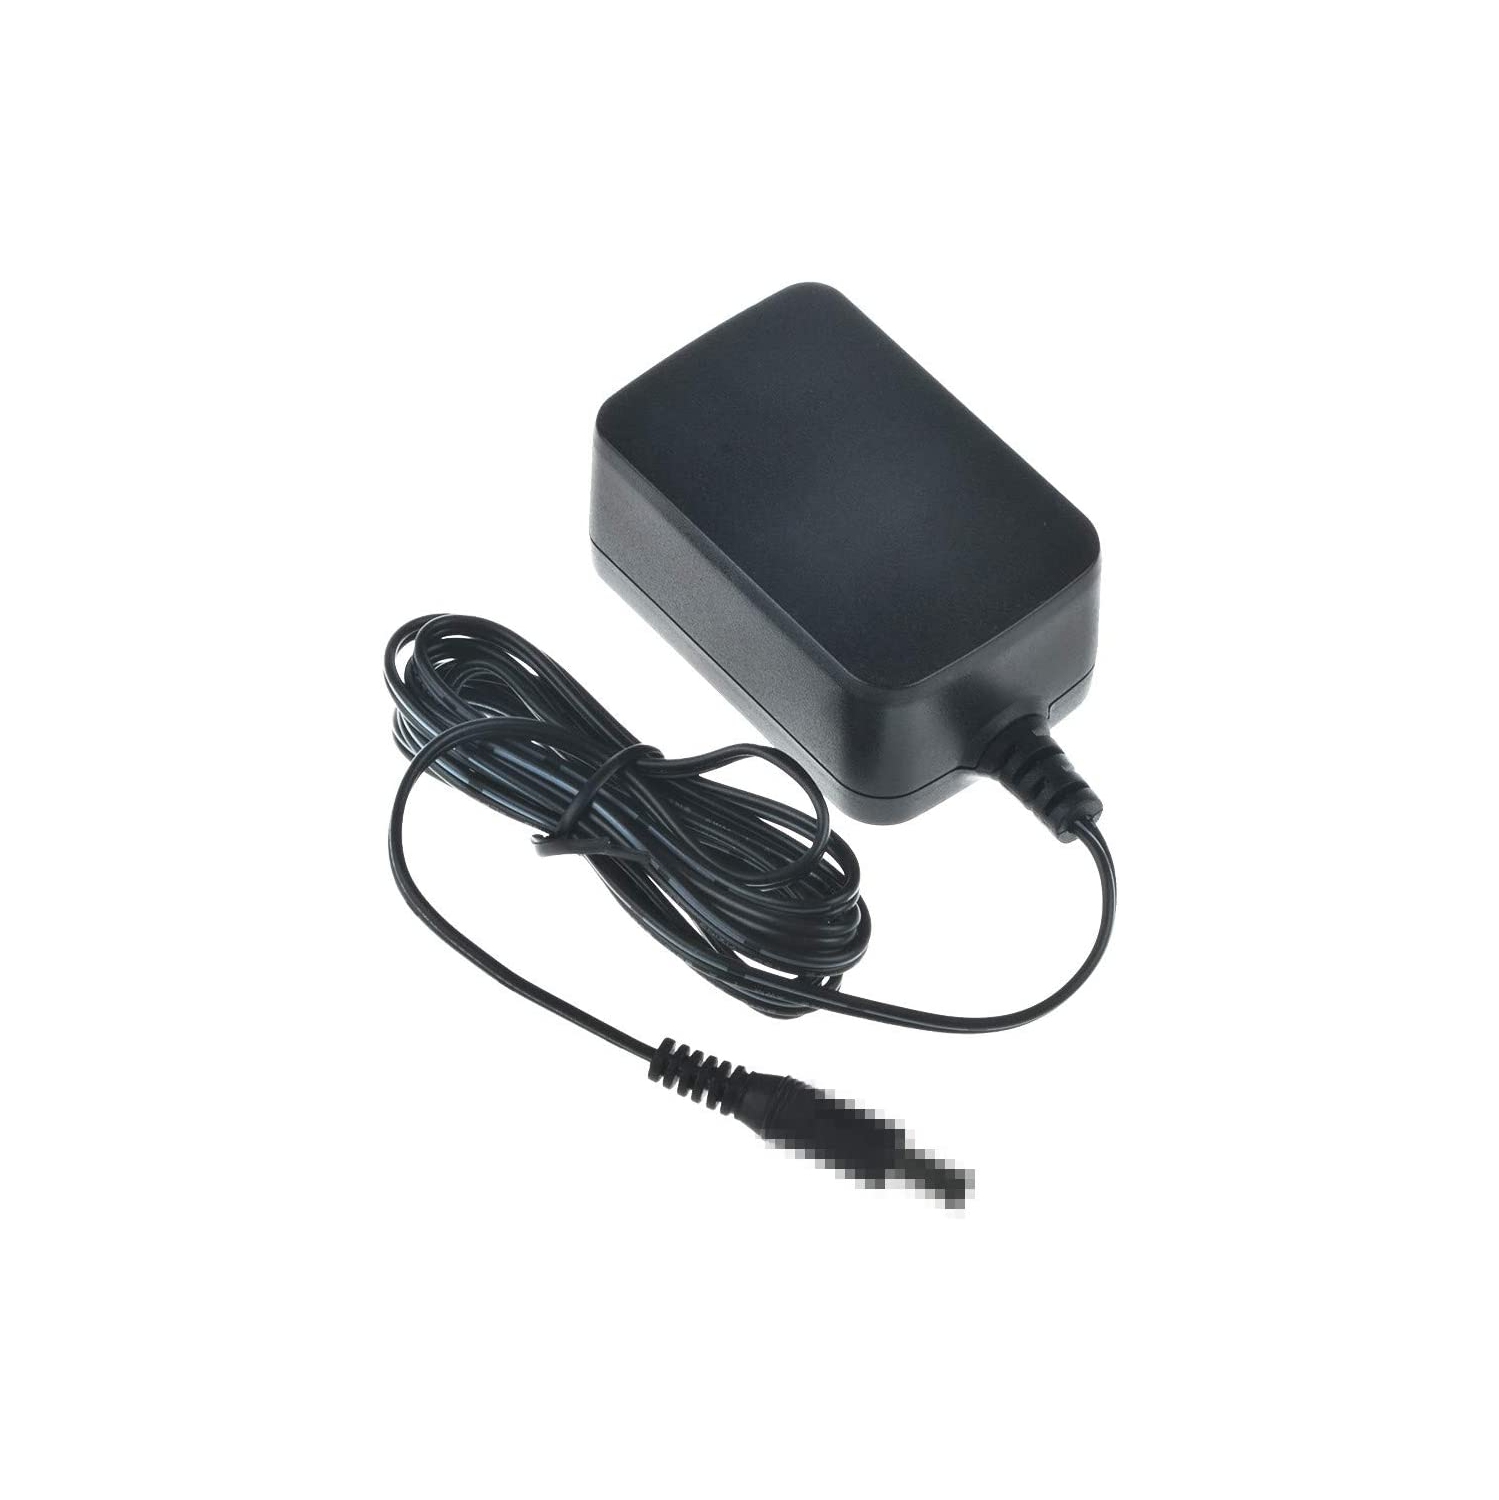 [UL Listed] 12V 1A Barrel Round Tip 5.5x2.5mm AC/DC Adapter for Tenis Tuttor Model 2 II Ball Machine Battery